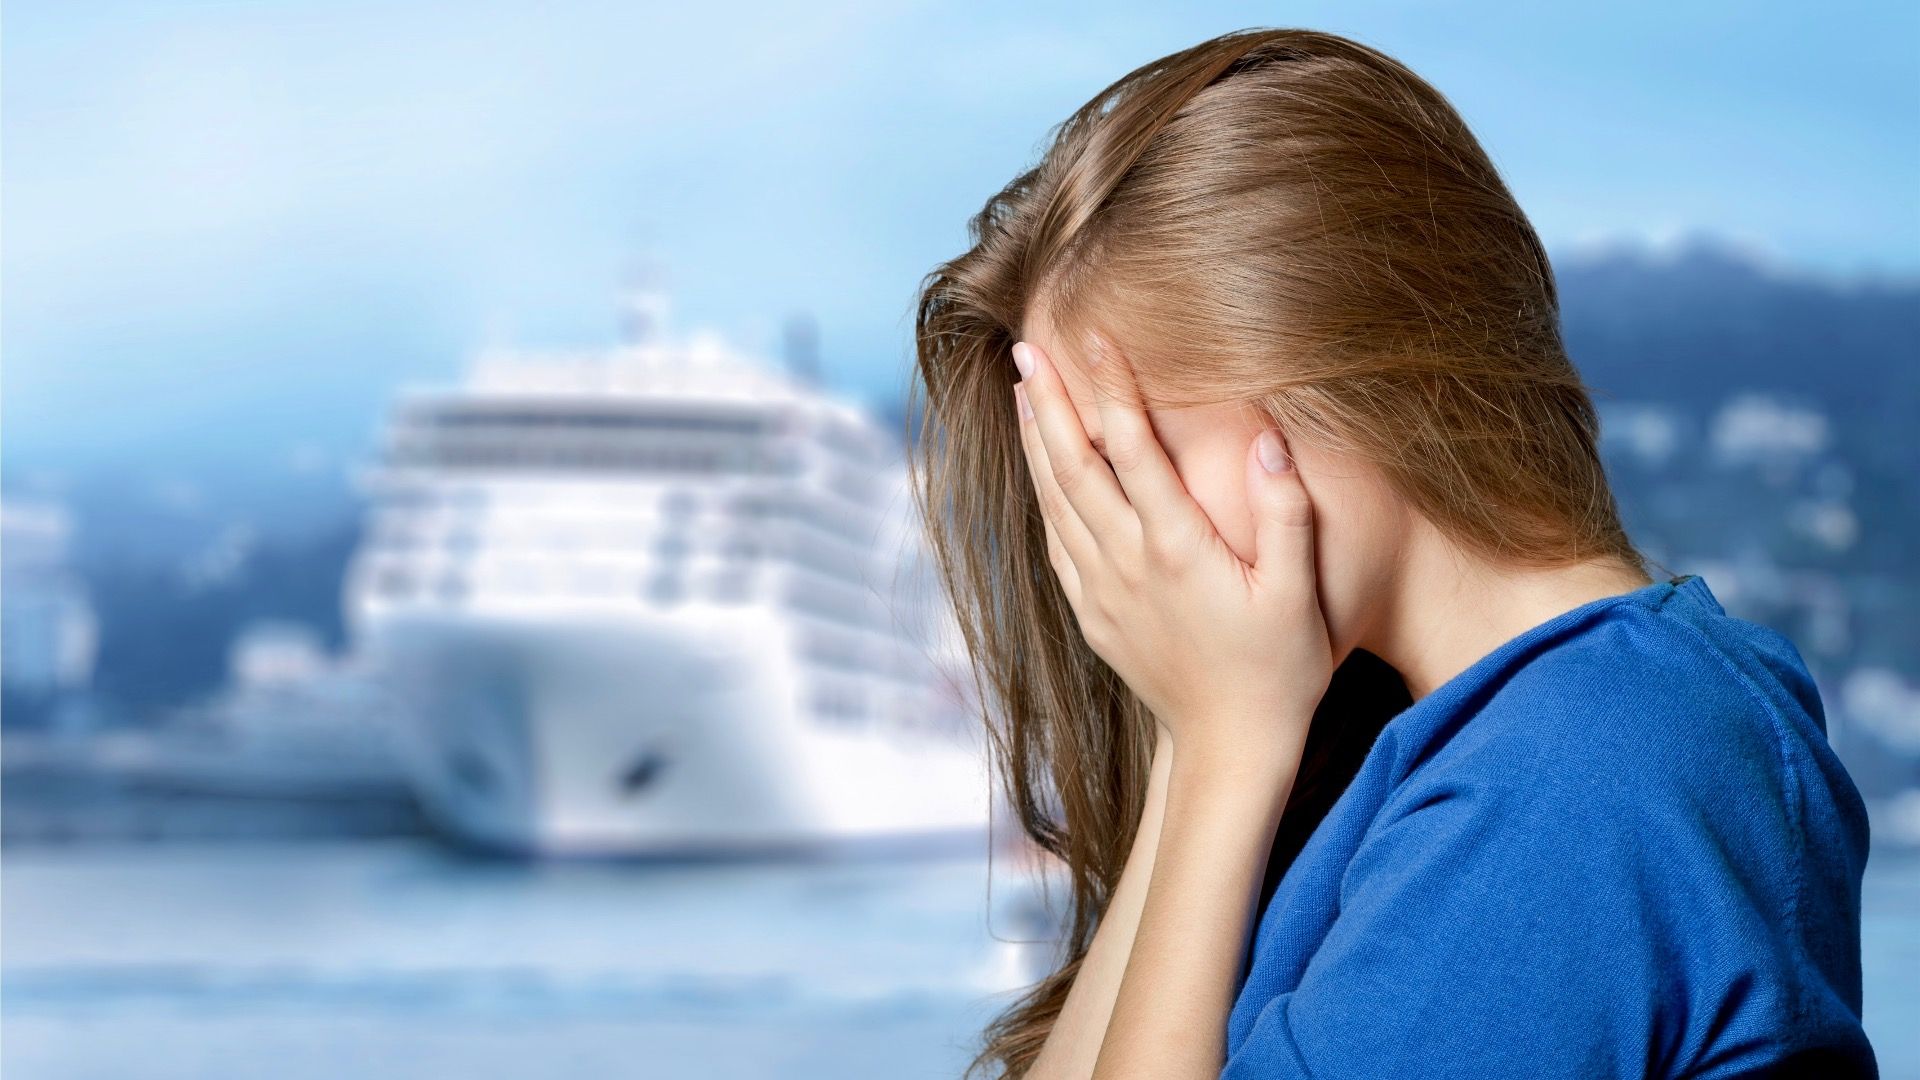 Woman banned from cruise ship, sad 